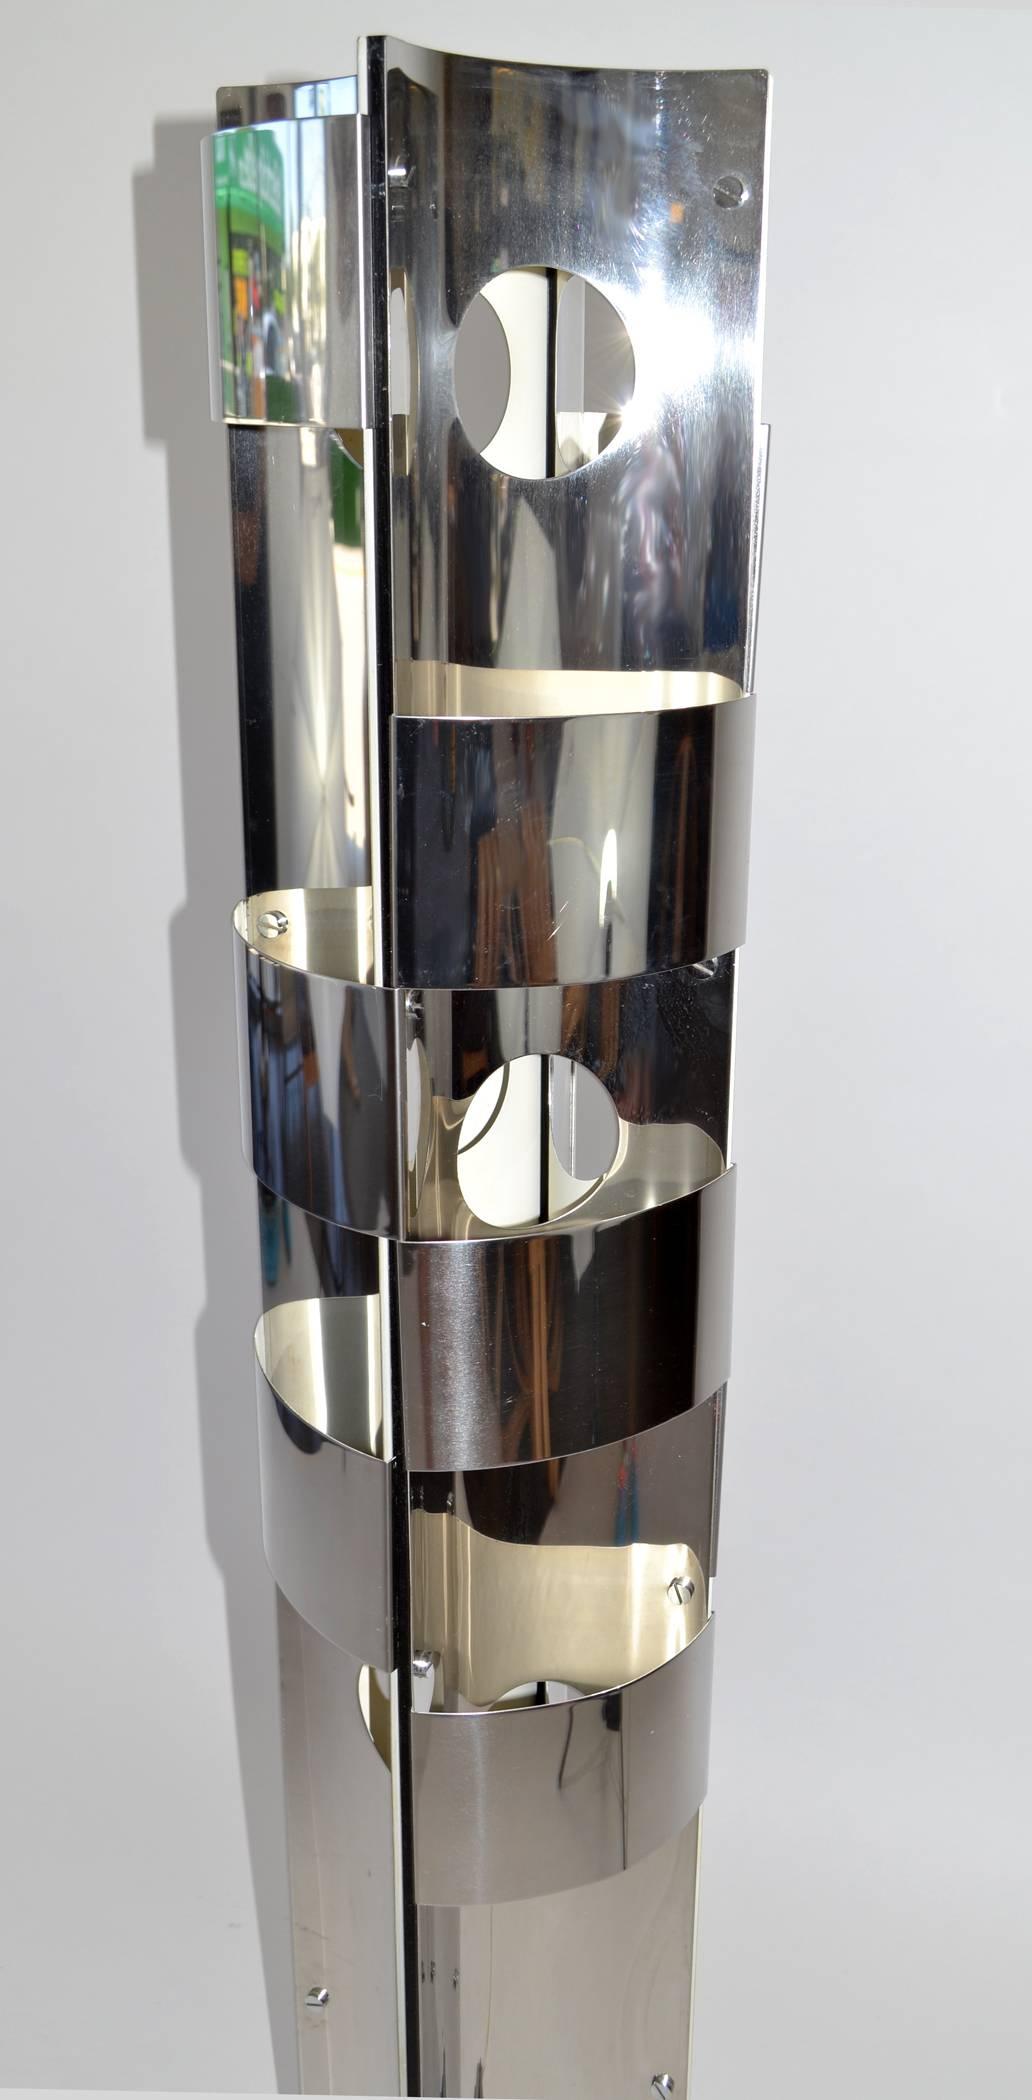 Italian skyscraper-style folded metal chrome floor lamp, by Gianfranco Fini and Fabrizio Cocchia, New Lamp, Italy, 1970. Adjustable, removable diffusers can be moved to diffuse light from cut-out forms. Inner enameled in white.
   